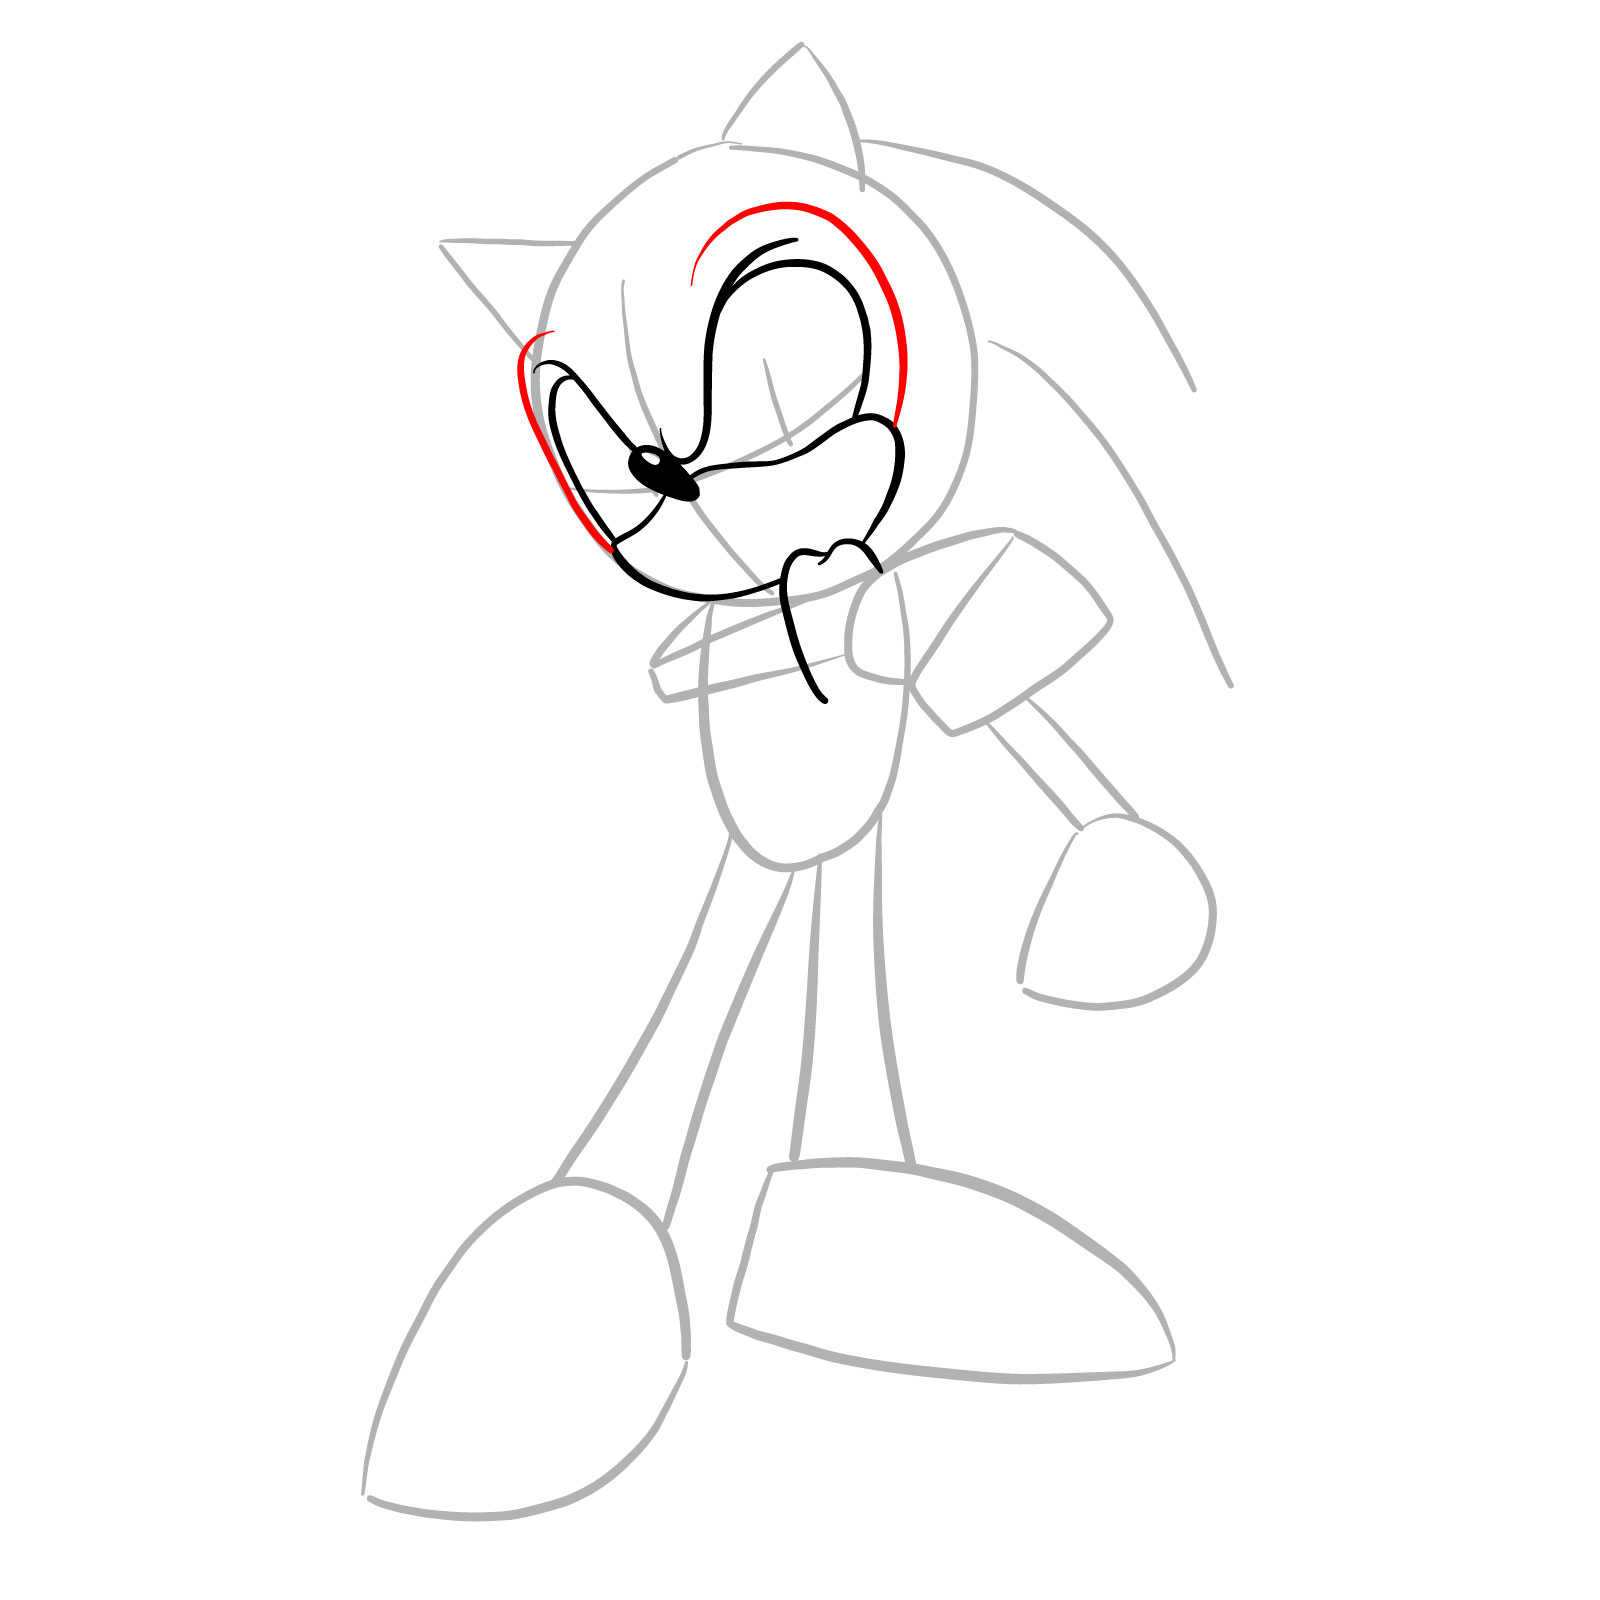 How to draw Coldsteel the Hedgehog - step 08